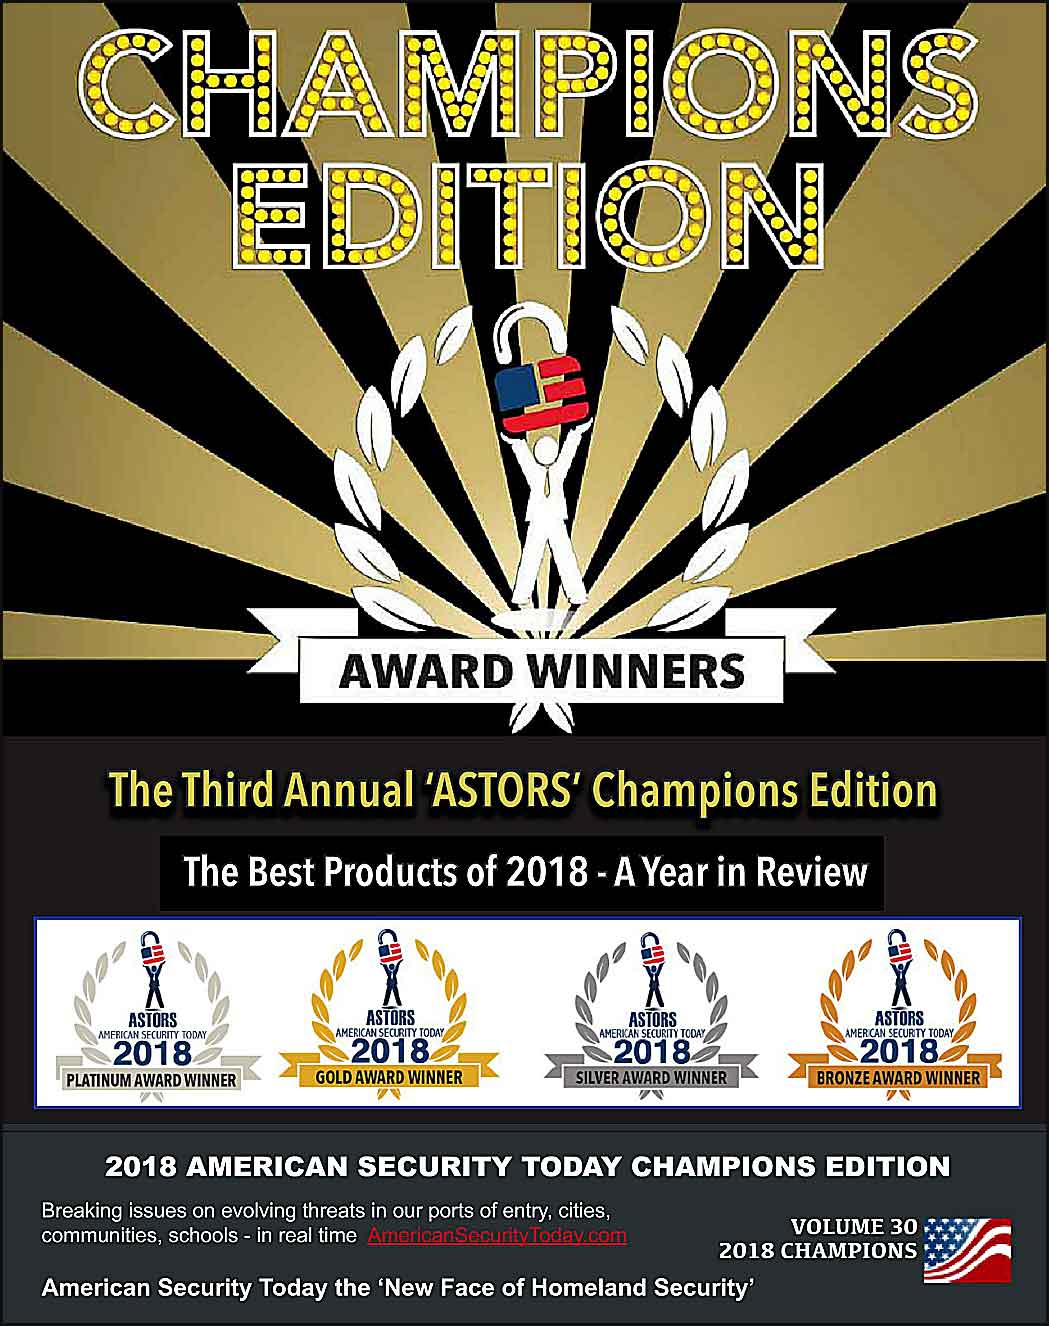 Nsa S 5th Annual Best Scientific Cybersecurity Paper Competition Award Winner Announced National Security Agency Central Security Service Article View